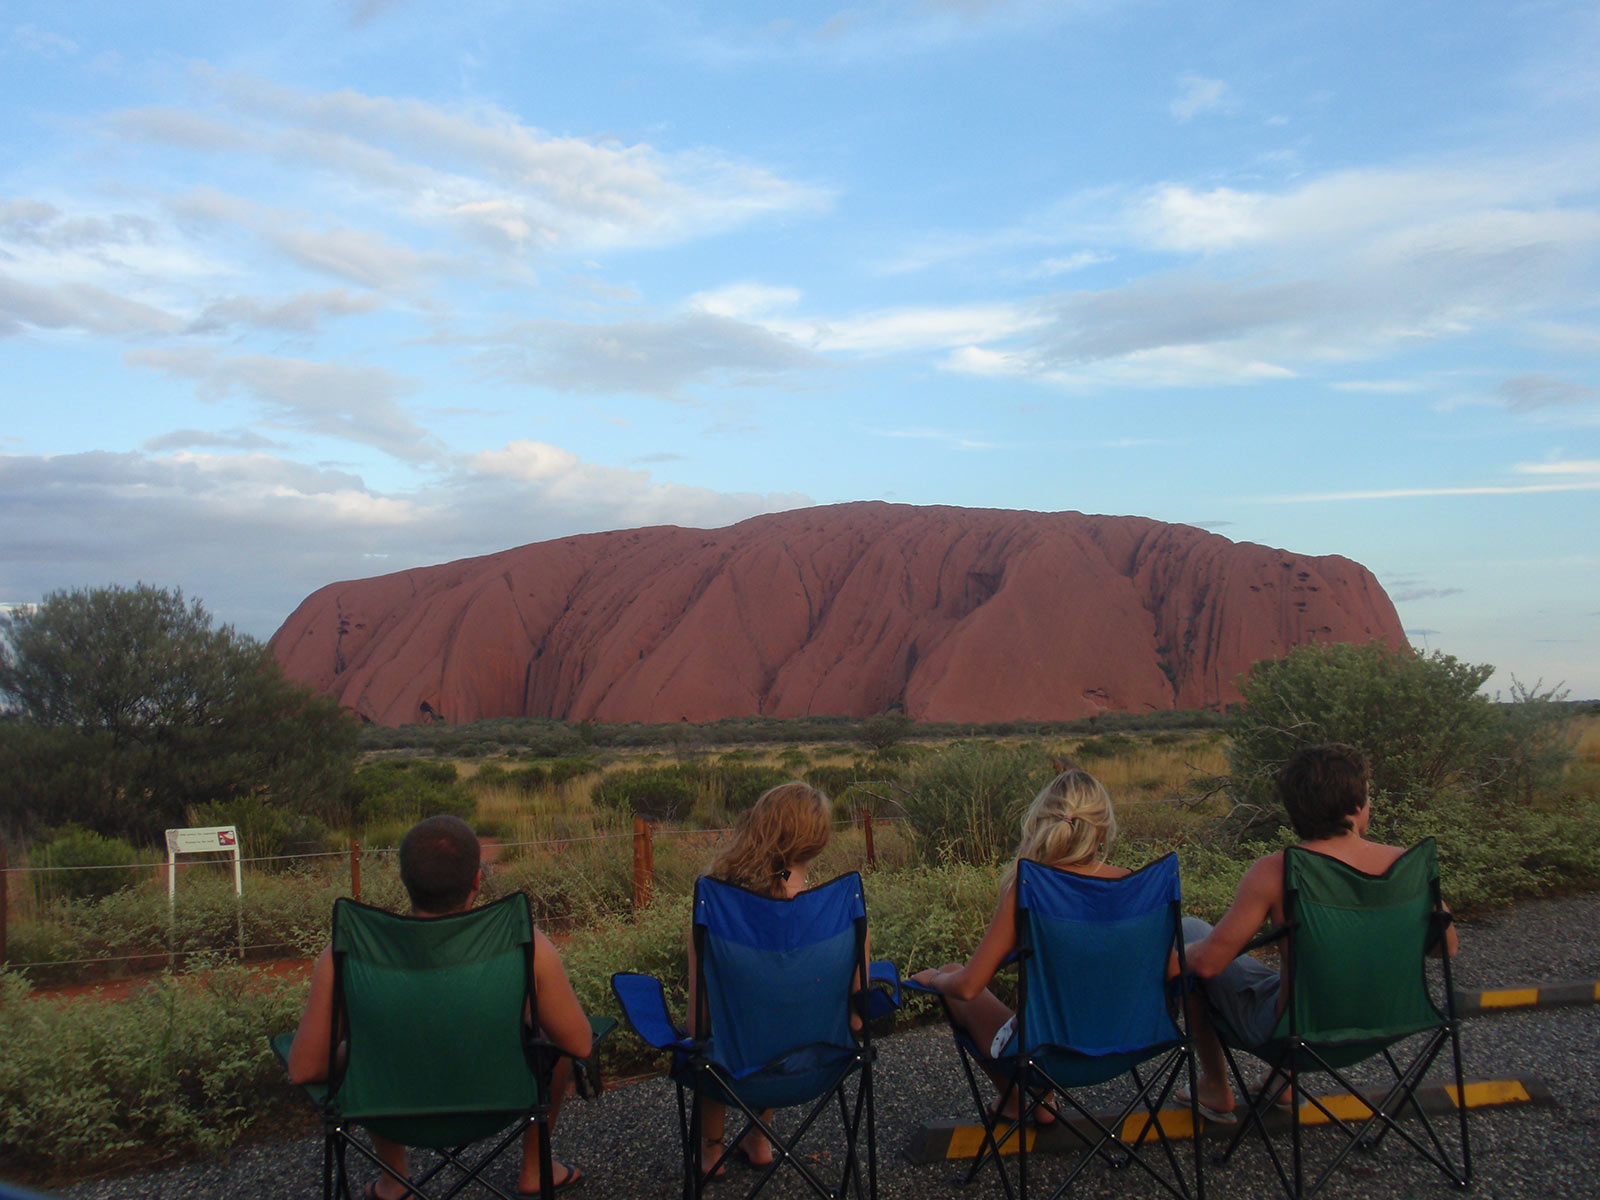 David Simpson and the gang at Ayer's Rock in Australia. Rescued in the middle of the desert